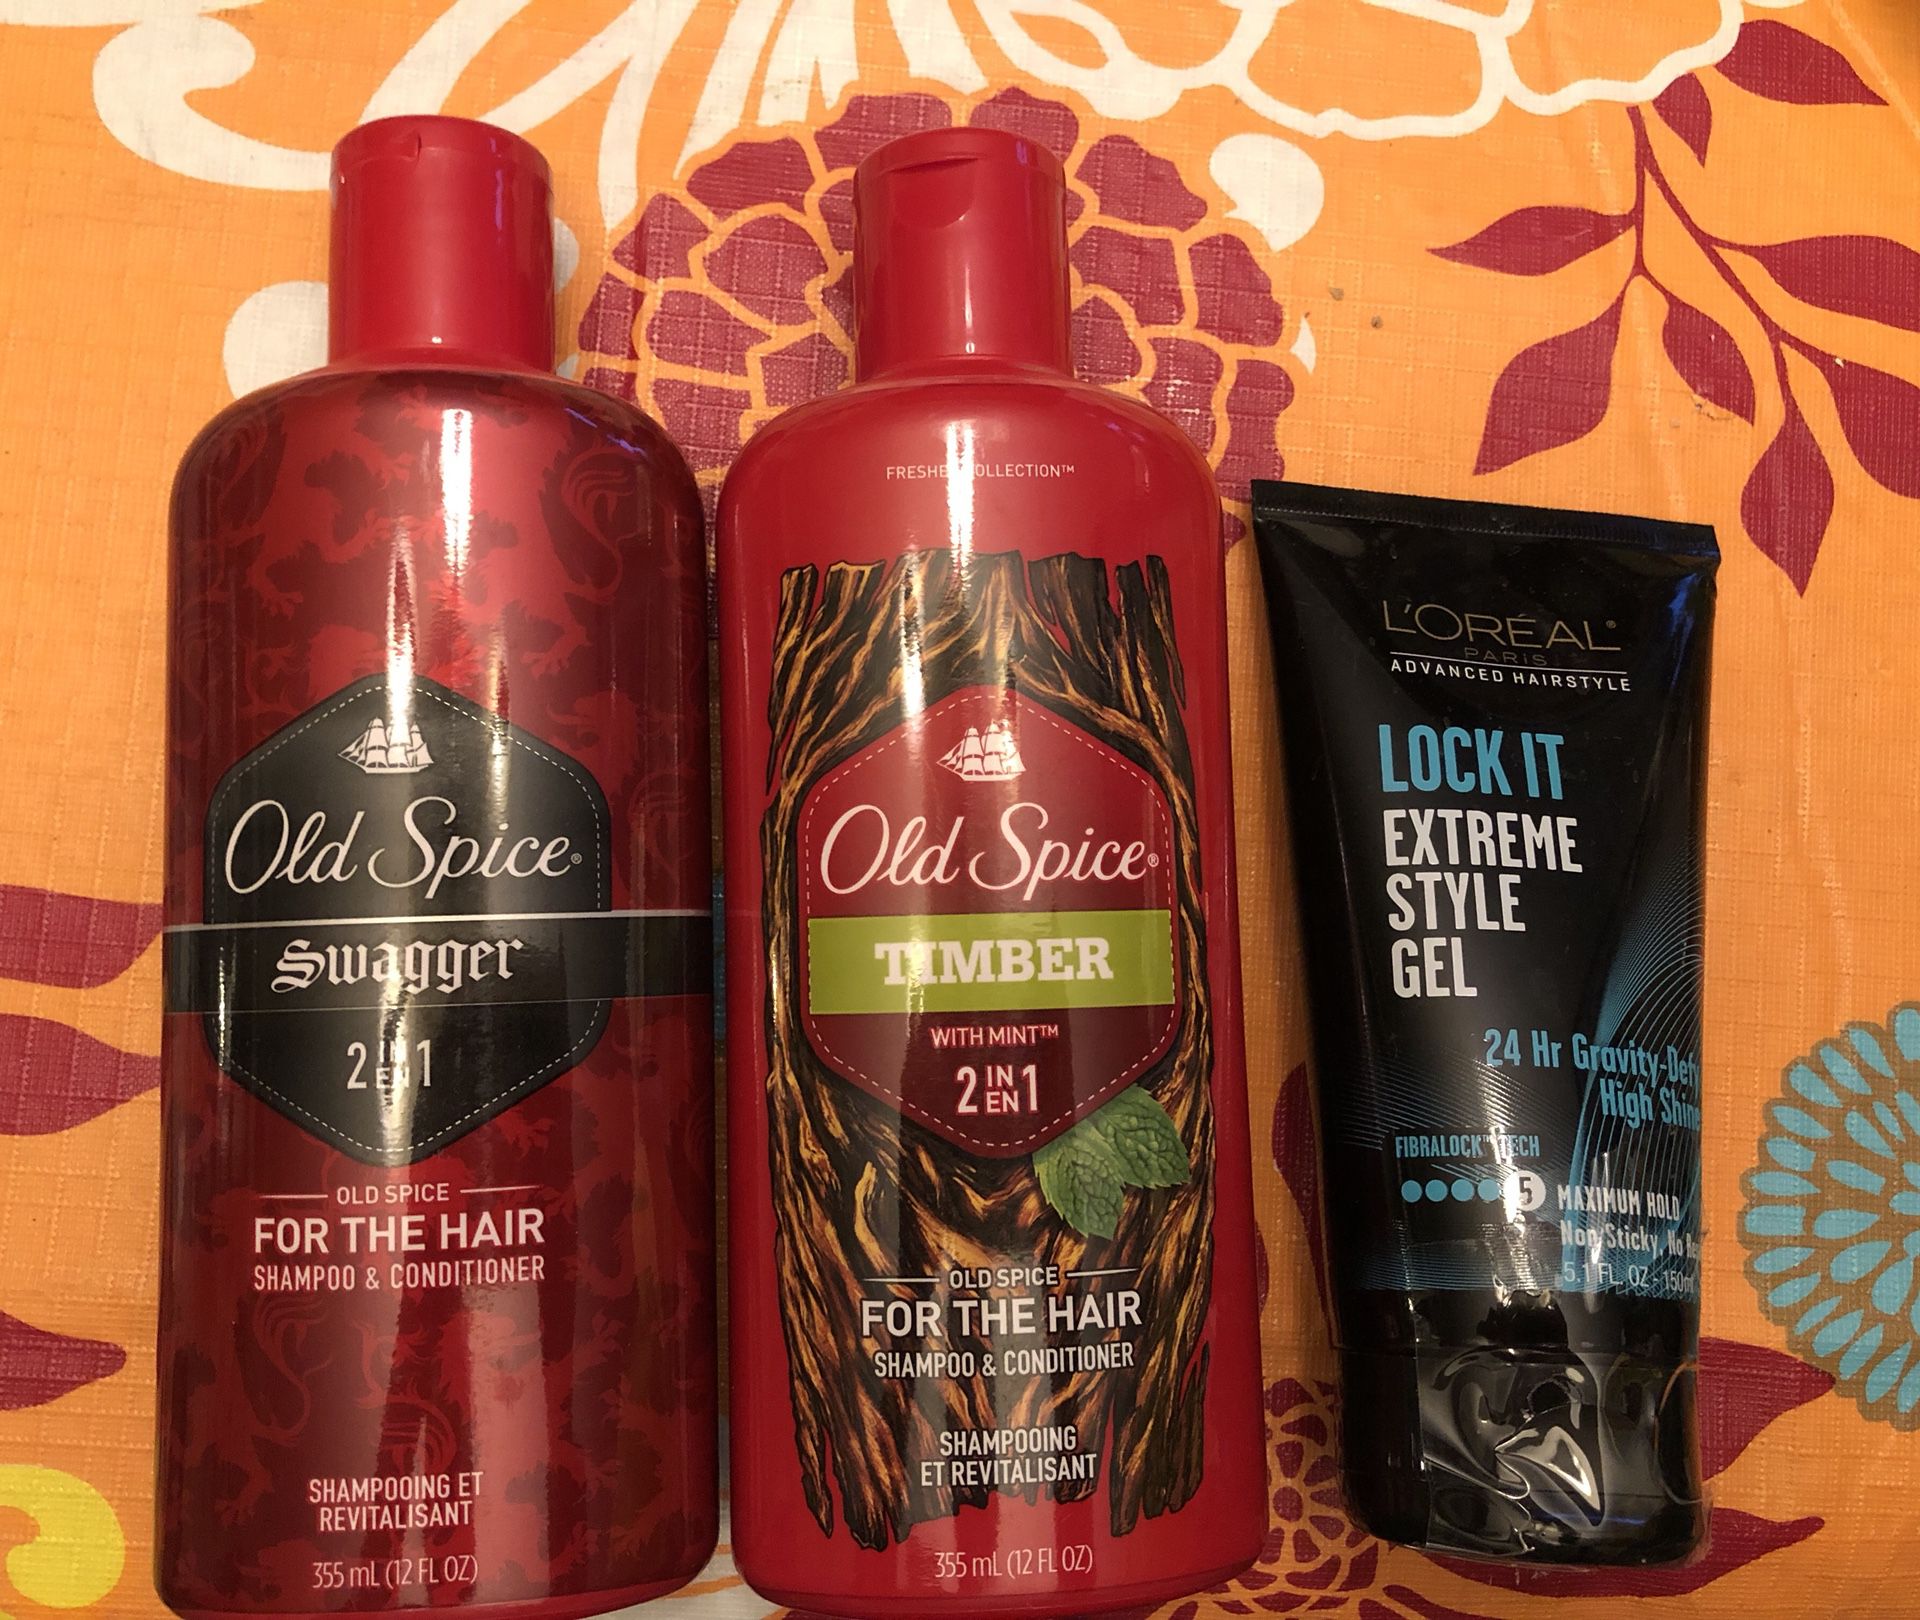 2 Old Spice Shampoo & Conditioner + 1 L’Oréal Extreme Style Gel 24 Hrs Gravity-Def: 3 for $12